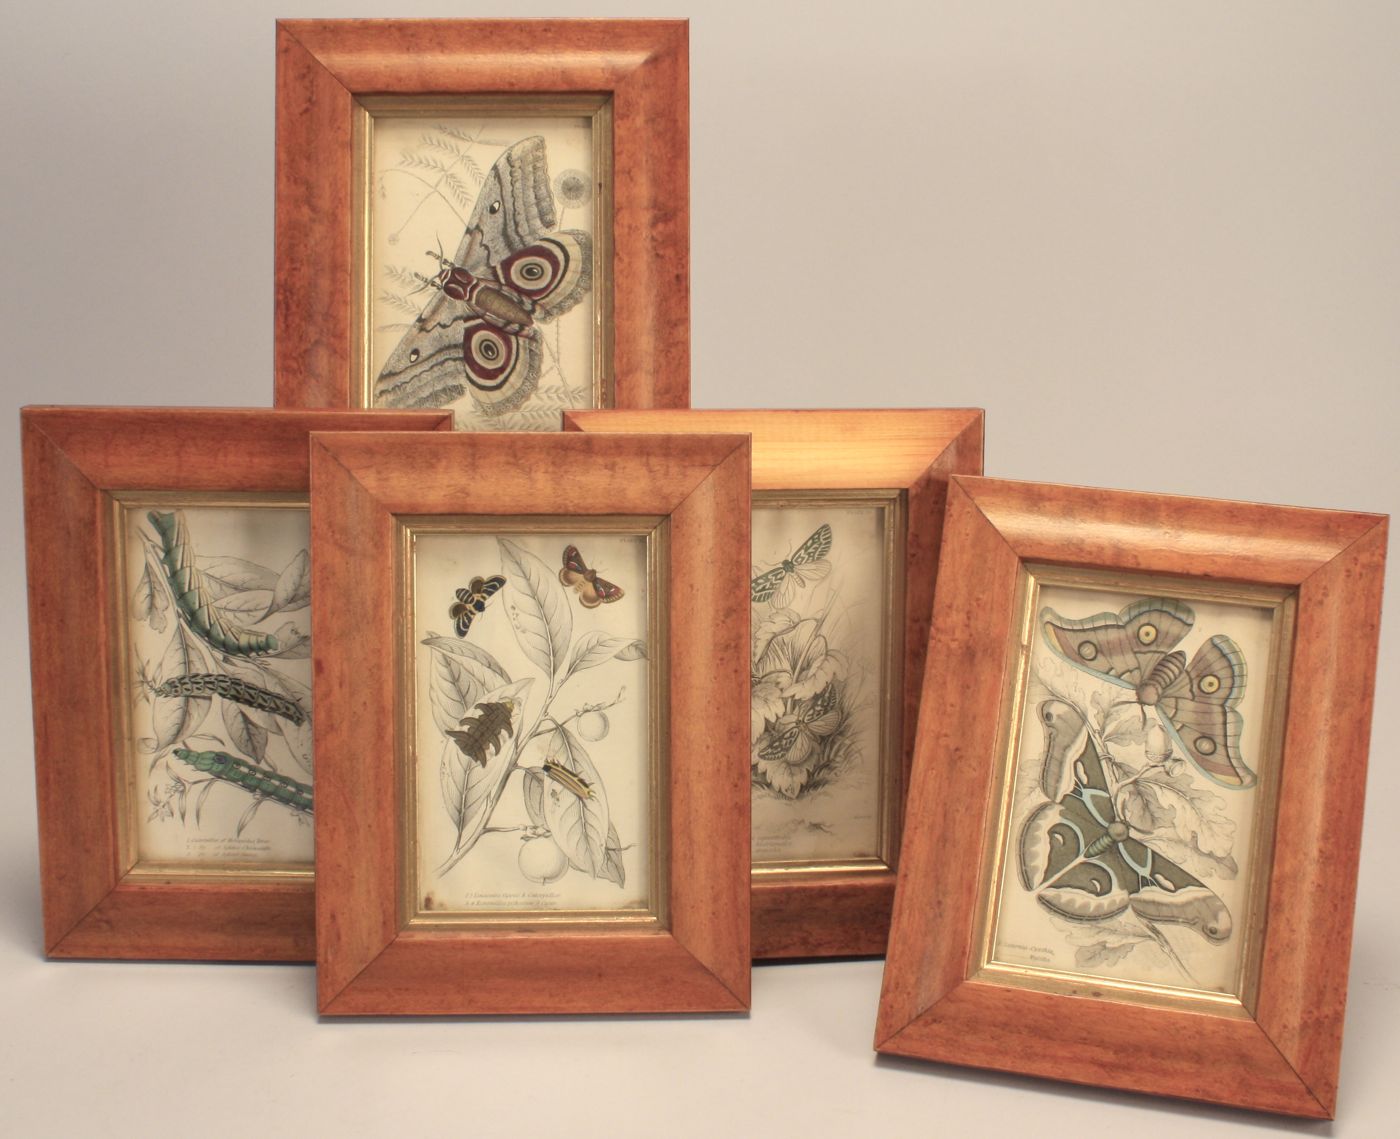 GROUP OF FIVE FRAMED HAND-COLORED